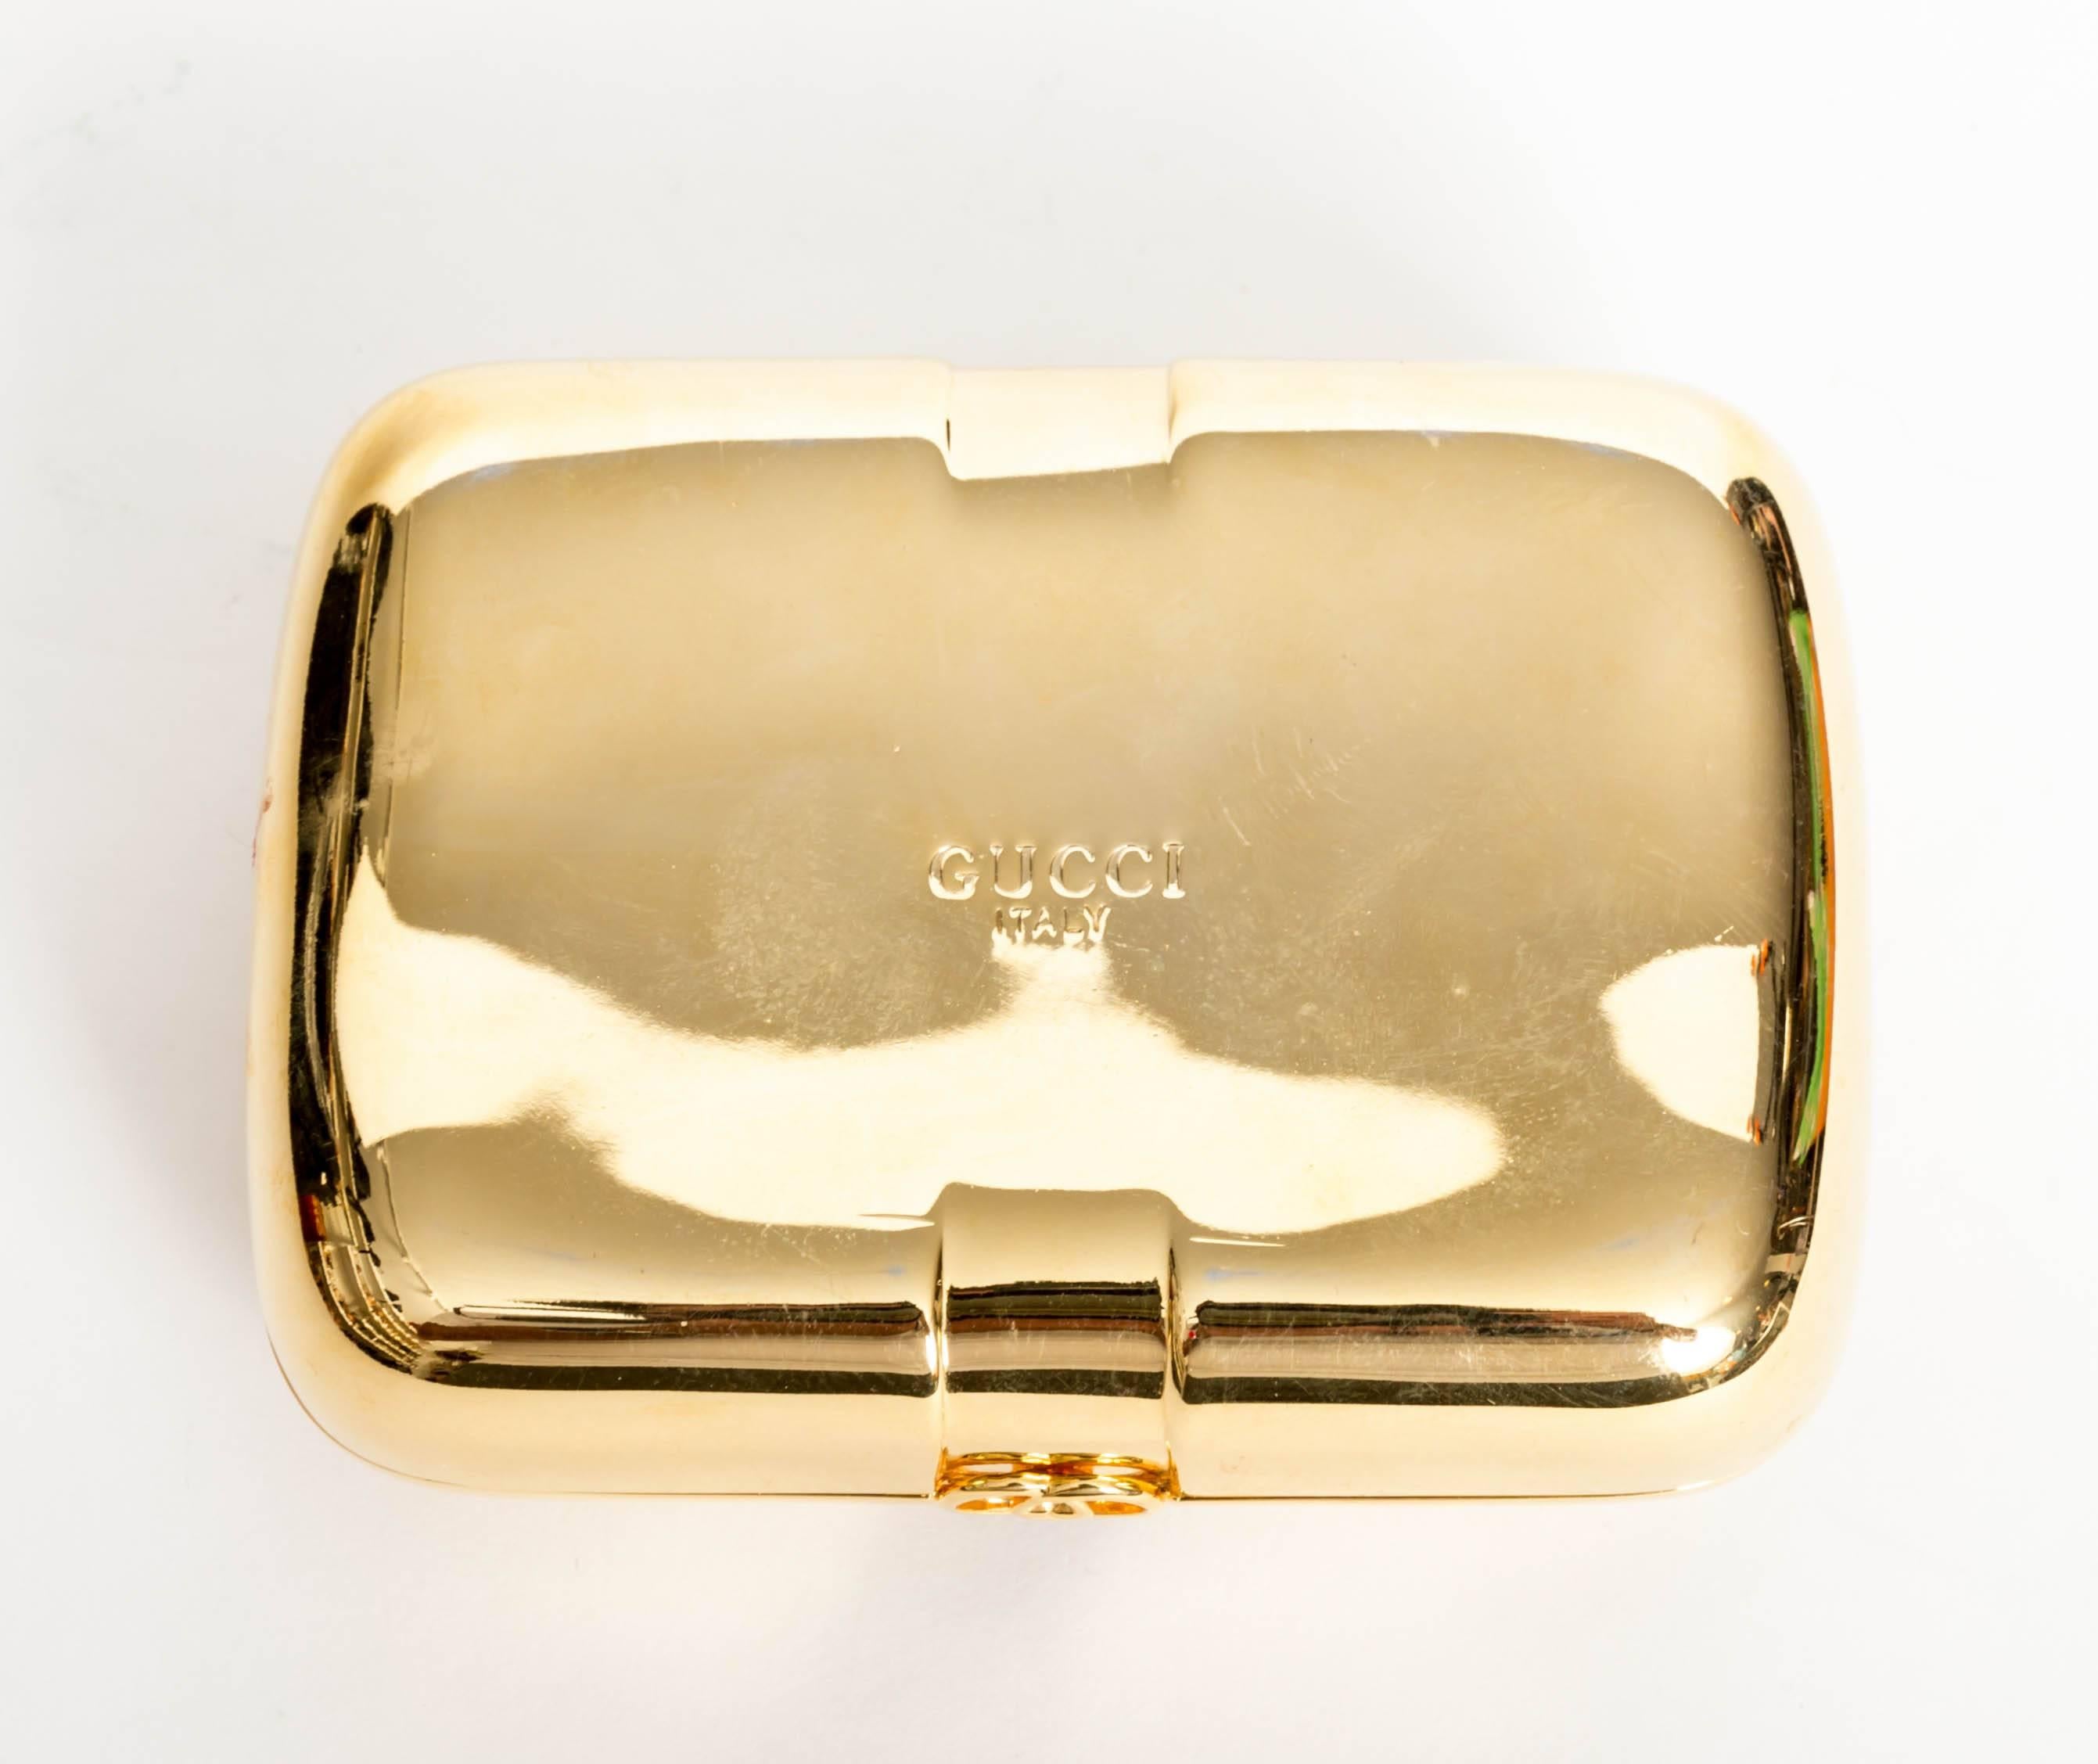 Vintage Gold Gucci Card Holder / Small Clutch 4